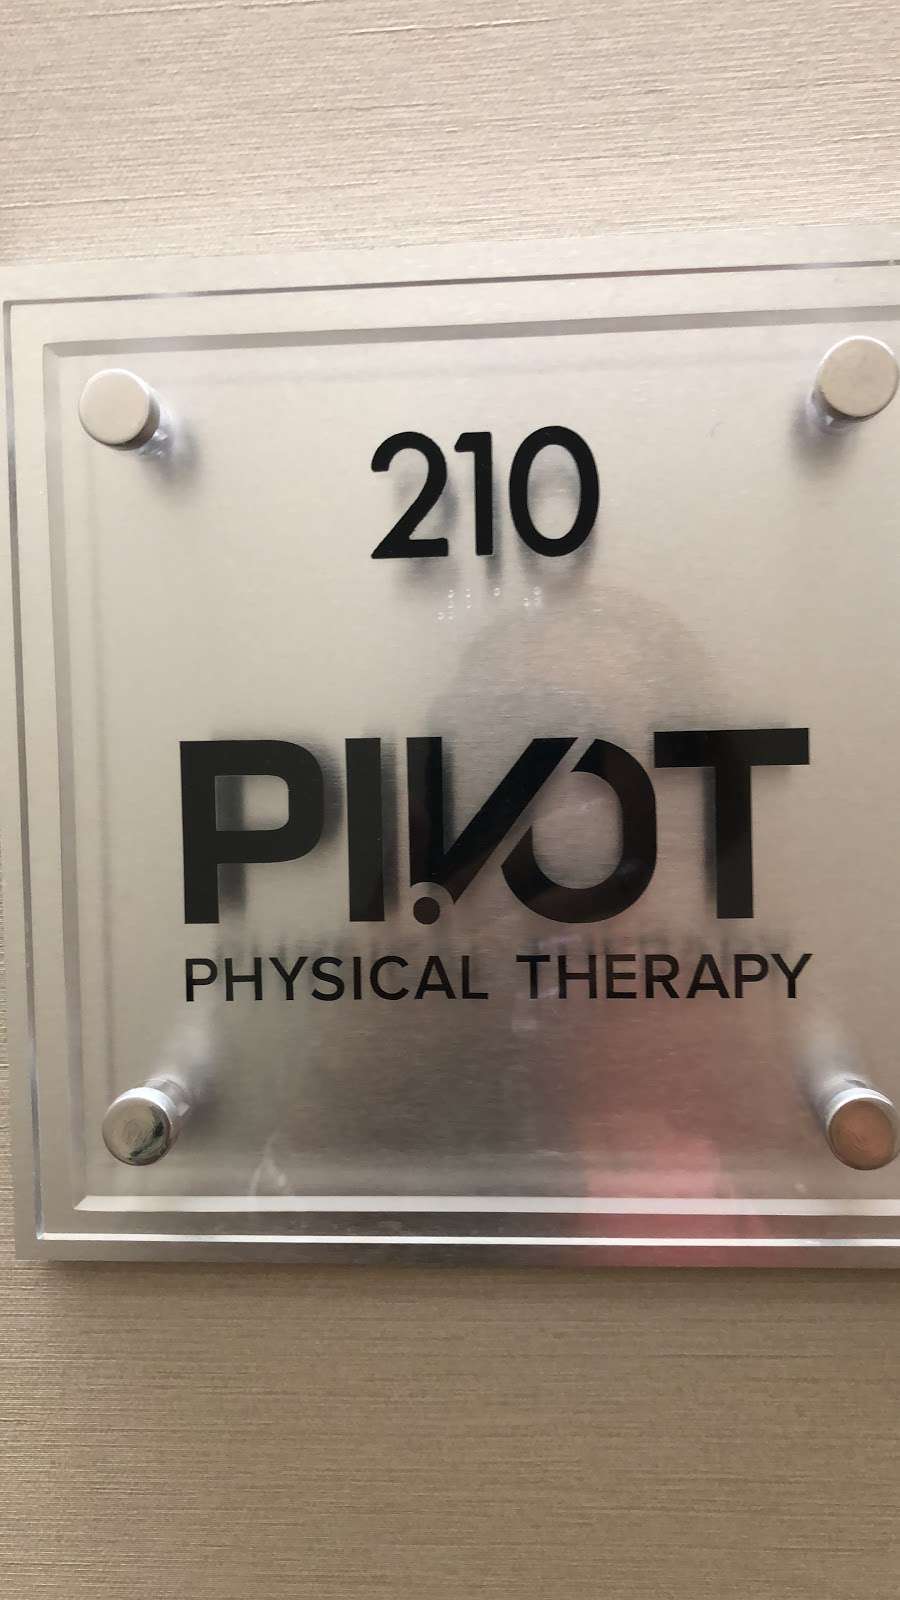 Pivot Physical Therapy | 10995 Owings Mills Blvd #210, Owings Mills, MD 21117, USA | Phone: (410) 654-2300